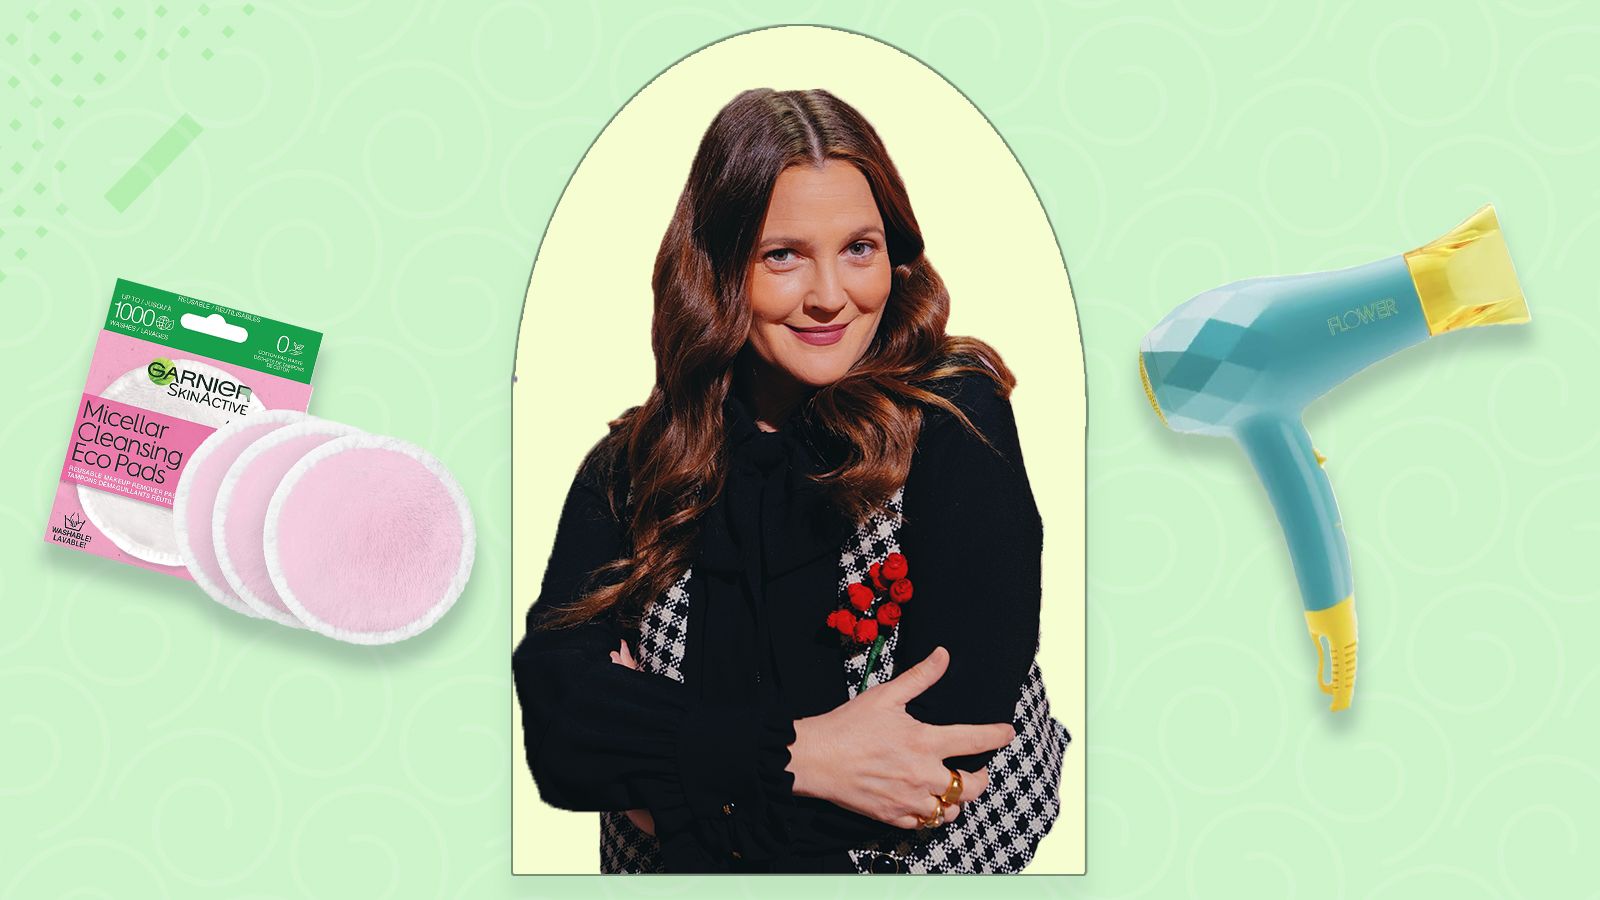 Why Women Everywhere Love Drew Barrymore's Beauty & Home Lines